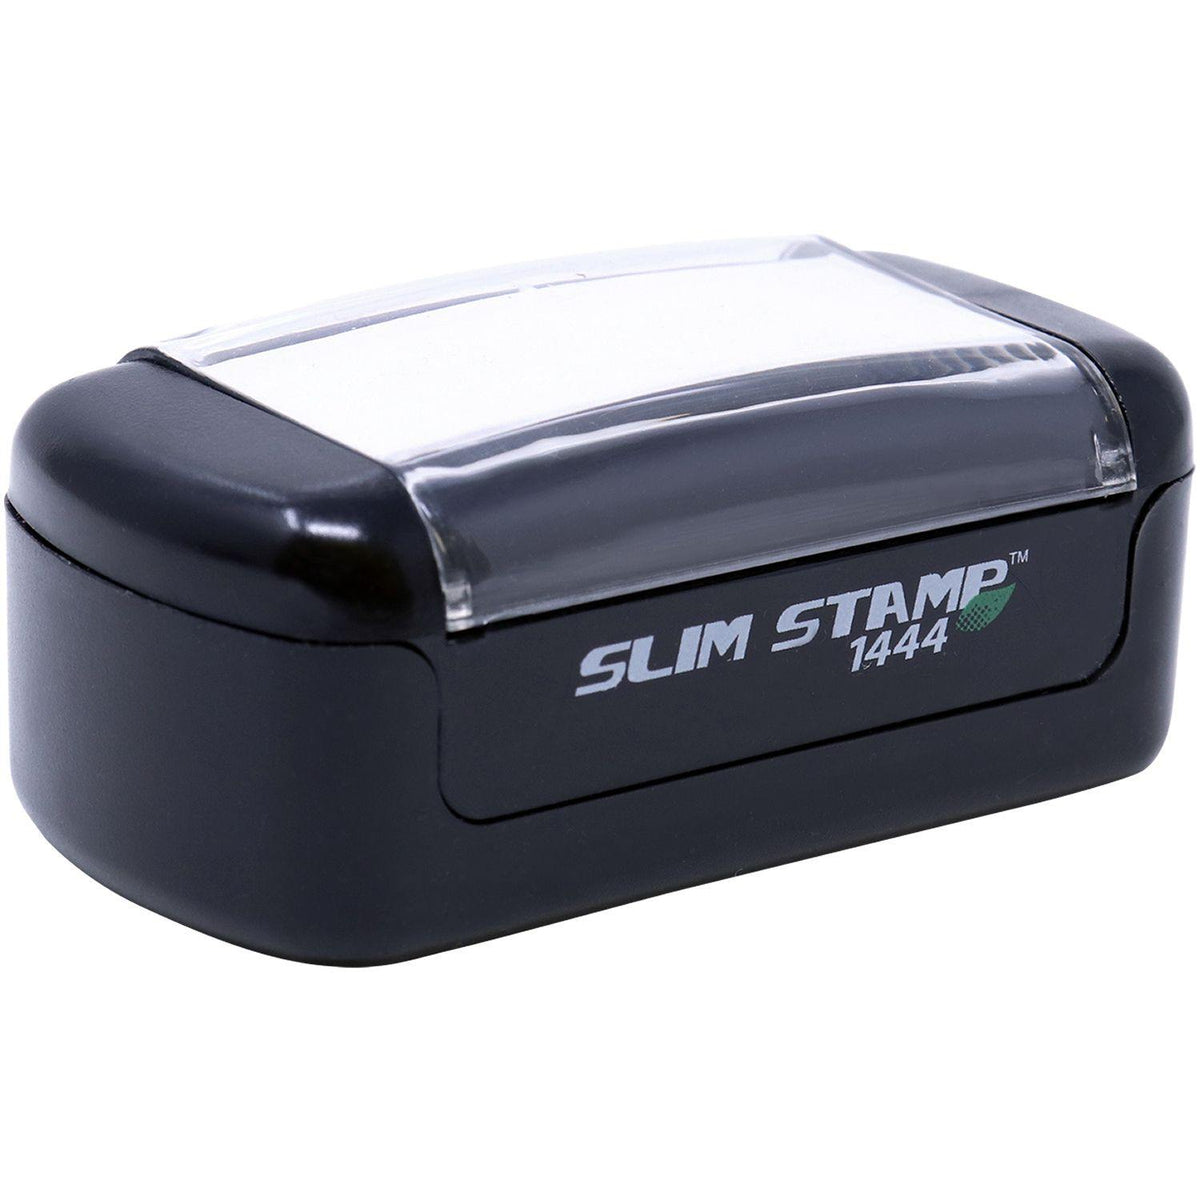 Alt View of Slim Pre-Inked Extra Credit Stamp Mount Angle